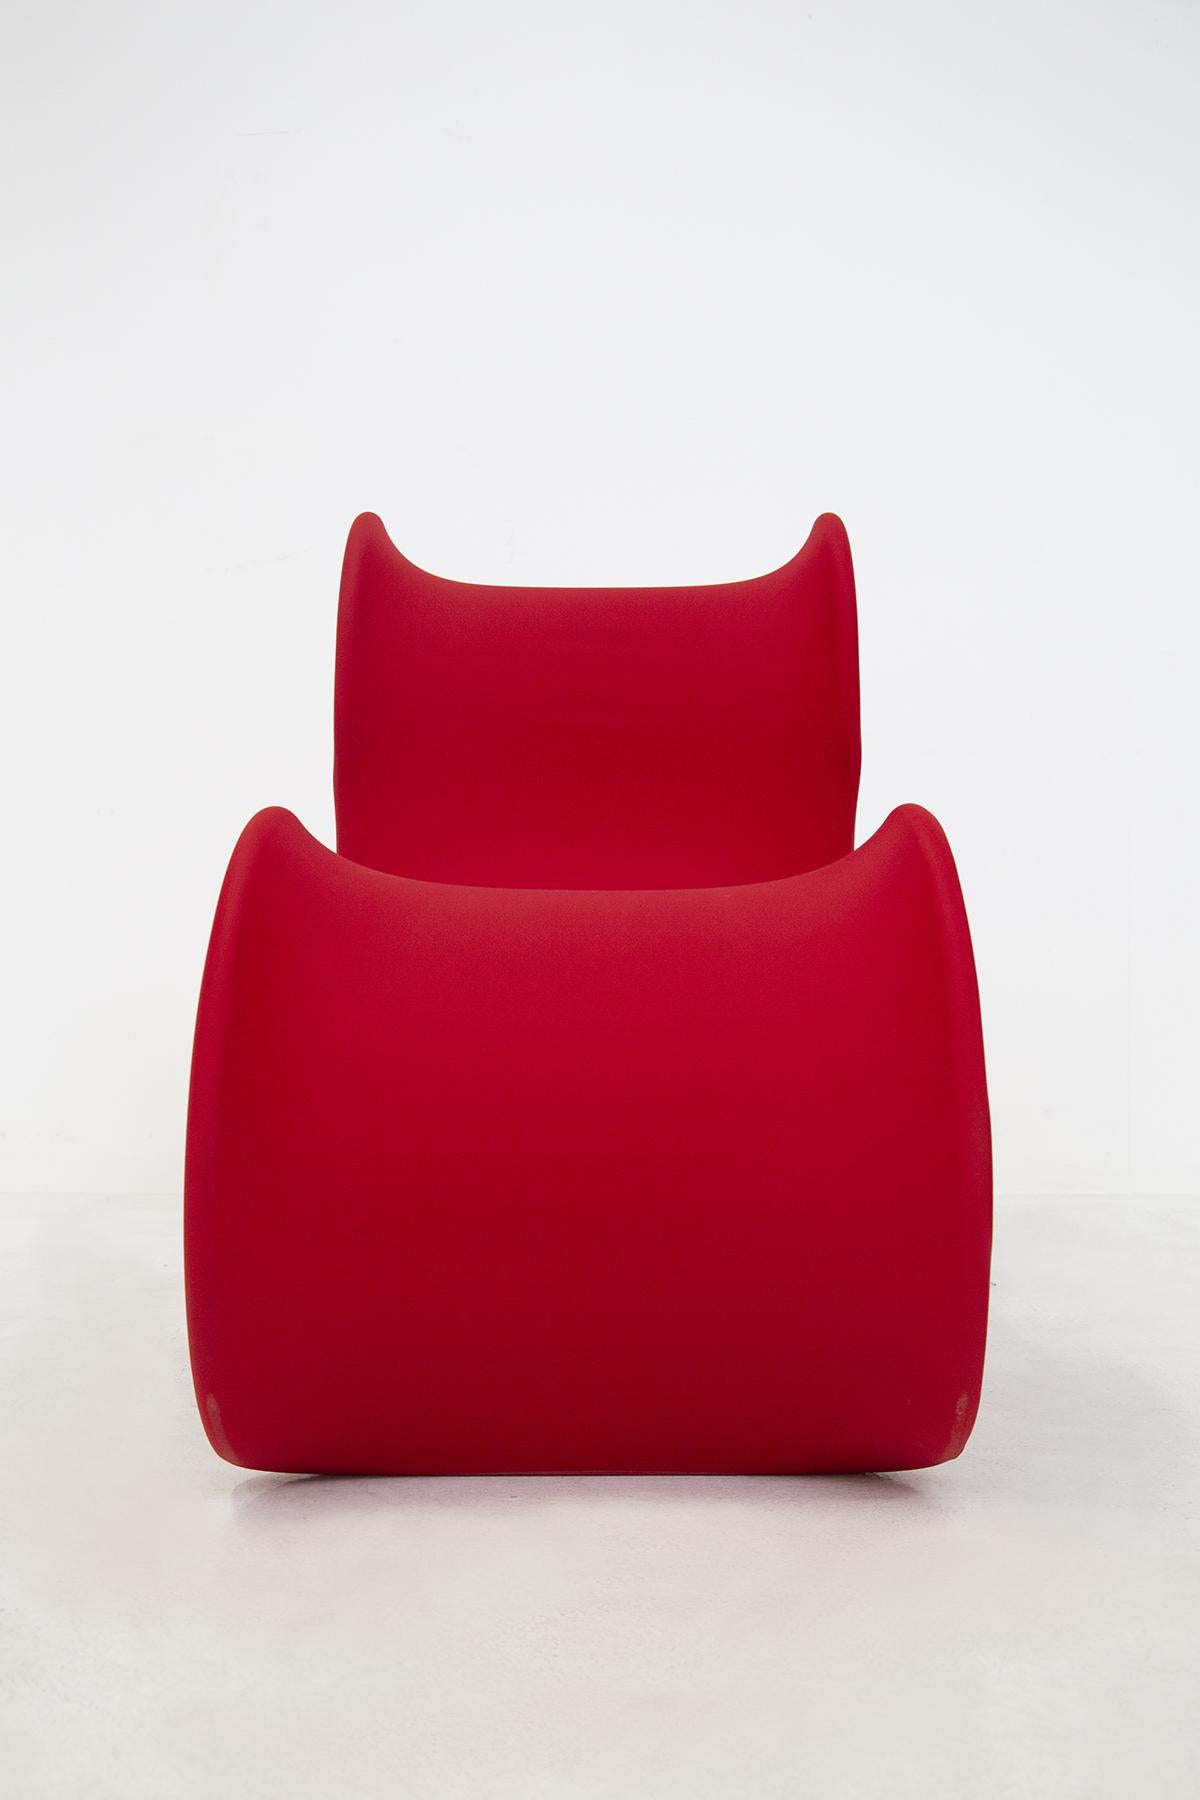 Gianni Pareschi Red Fiocco Armchair for Busnelli For Sale 1